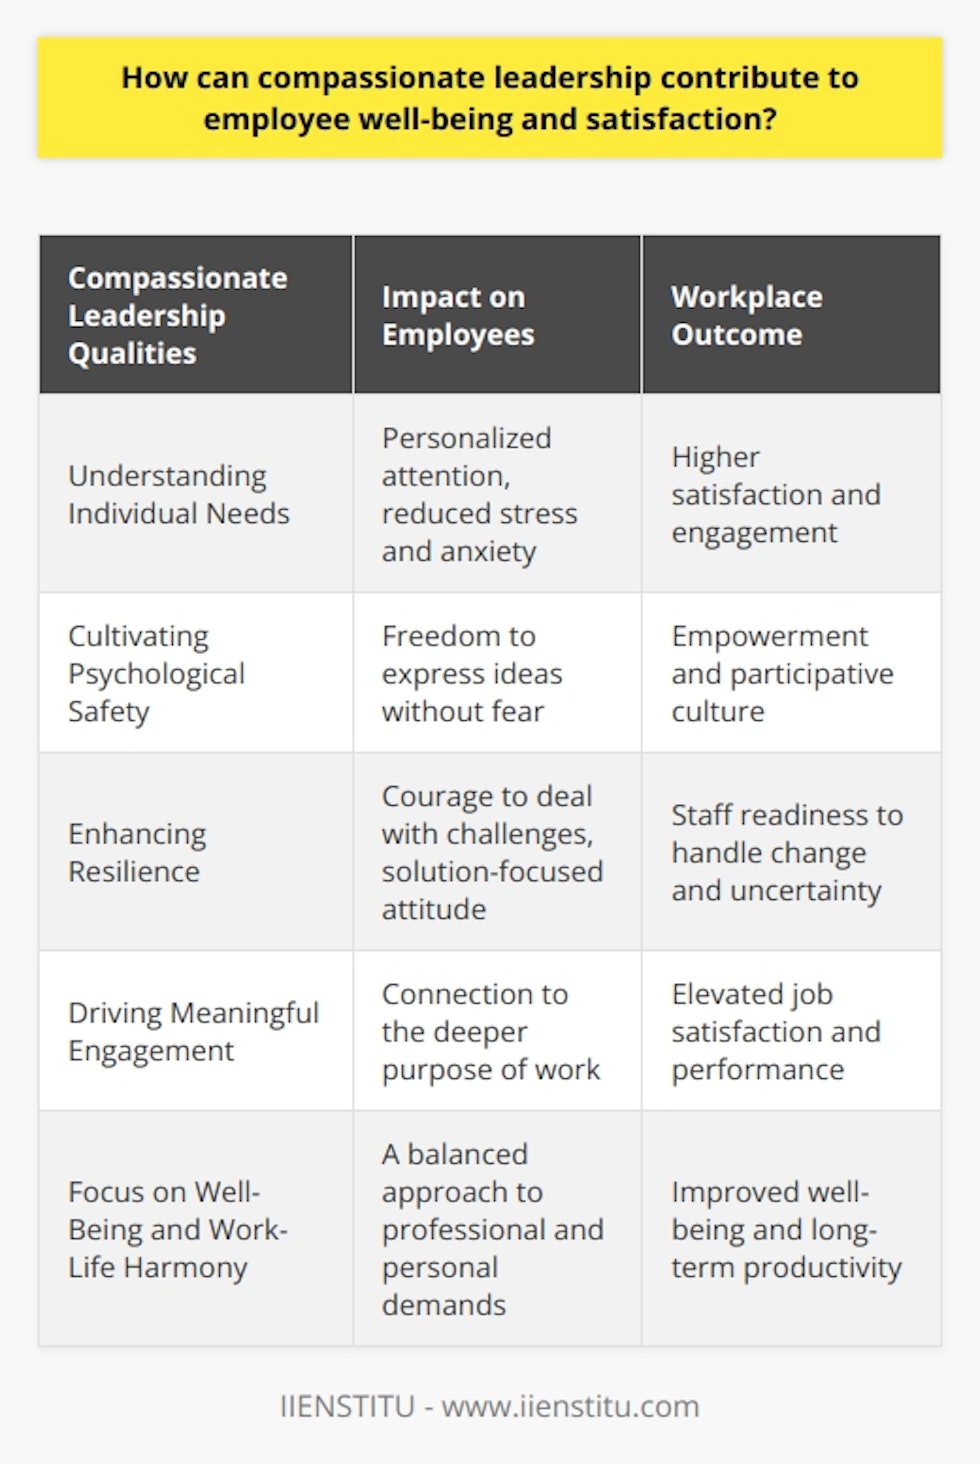 Compassionate leadership goes beyond traditional leadership roles by placing a high value on understanding and addressing the personal and emotional needs of employees. Recognizing that job satisfaction and emotional well-being are intricately linked, leaders who show compassion often cultivate a more harmonious and productive workplace.Understanding Individual NeedsCompassionate leaders have the innate ability to perceive and understand the unique personal circumstances and challenges that their team members face. They are adept at tailoring their approach to suit the needs of each individual, thereby creating a supportive atmosphere that can alleviate work-induced stress and anxiety. This personalized attention ensures that employees feel heard and cared for, directly impacting their satisfaction and engagement levels.Cultivating Psychological SafetyA compassionate leader often sets the tone for a psychologically safe environment, where employees are encouraged to express their thoughts, ideas, and concerns without fear of criticism or retribution. By valuing and actively seeking input from employees, leaders enhance the participative aspect of the work culture, which can lead to increased job satisfaction and a sense of empowerment among staff.Enhancing ResilienceCompassionate leaders are key to building a resilient workforce. They inspire employees to face challenges with courage and adopt a solution-focused mindset. During times of uncertainty or change, such as during organizational restructuring or market volatility, the steadying influence of a compassionate leader can help employees navigate difficulties with greater ease and confidence.Driving Meaningful EngagementEmployees tend to thrive under leadership that connects them with the deeper purpose of their work. Compassionate leaders are skilled at articulating the impact that each role has within the organization and the community. By helping employees see the value and purpose in their day-to-day tasks, leaders drive meaningful engagement, which significantly elevates job satisfaction.Focus on Well-Being and Work-Life HarmonyWork-life harmony is another aspect where compassionate leaders can make a significant difference. They understand that long-term satisfaction and productivity come from a healthy balance between professional responsibilities and personal life. Initiatives such as encouraging regular breaks, respecting personal time, and allowing flexible working arrangements when possible reflect a compassionate approach that boosts employee well-being and satisfaction.While compassionate leadership is not a new concept, it is a growing trend that has a profound impact on employee satisfaction and well-being. Those in leadership roles who demonstrate genuine care for their team not only create a desirable workplace culture but also pave the way for sustainable business success. In practice, institutes like IIENSTITU, with a focus on leadership development, play a vital role in shaping leaders who are equipped with the skills to foster such a supportive and growth-oriented environment.